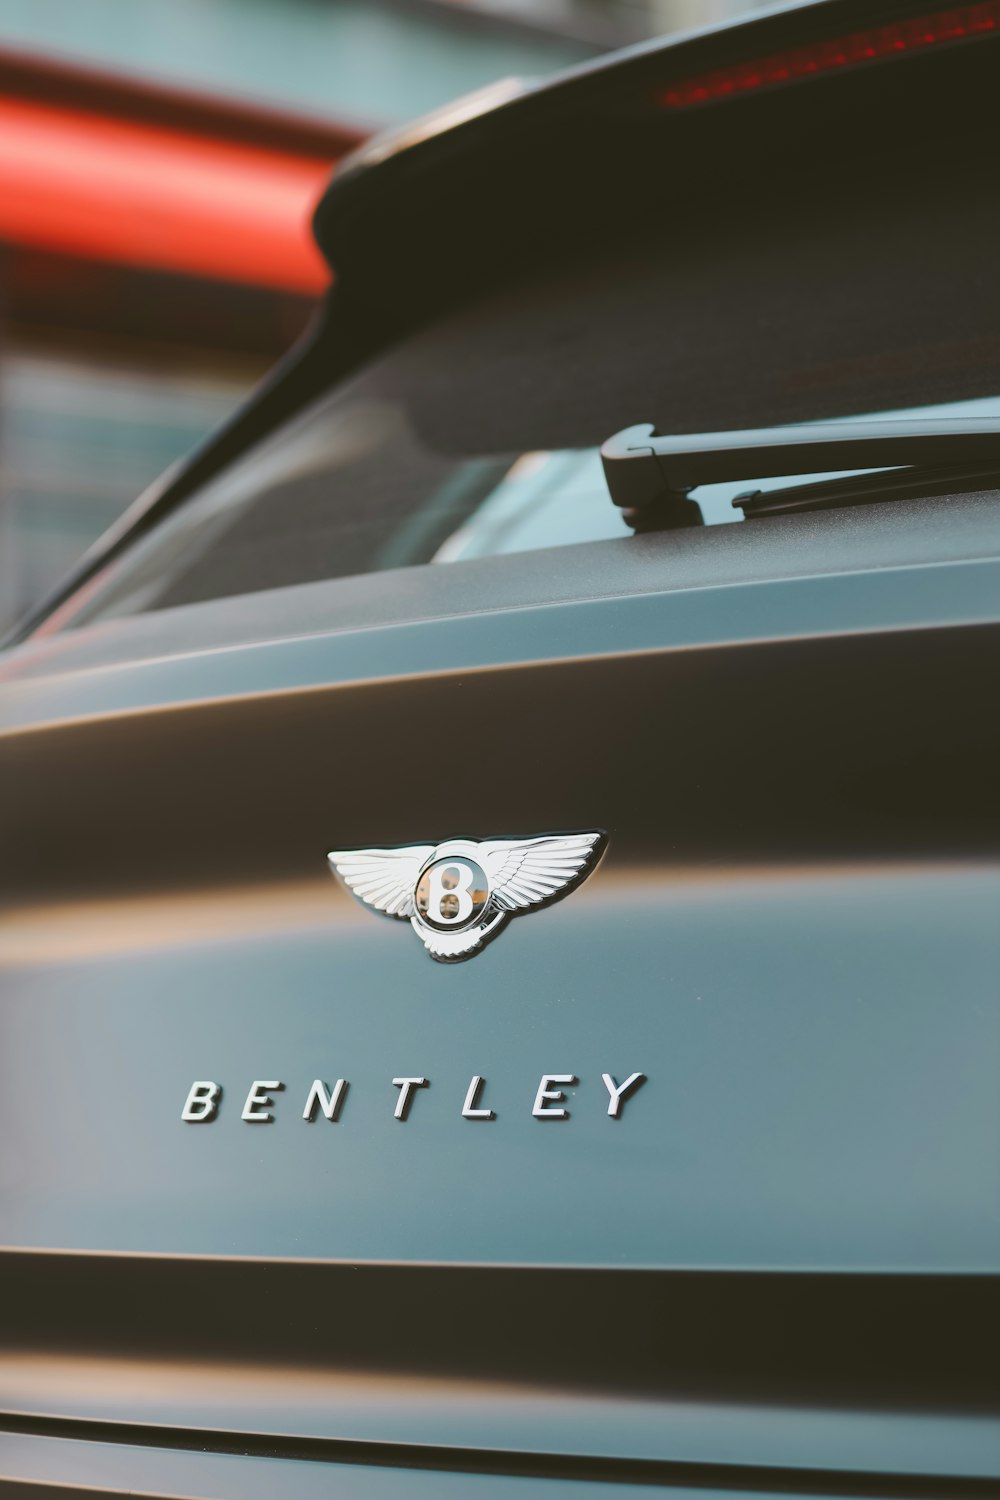 a bentley logo is shown on the side of a car